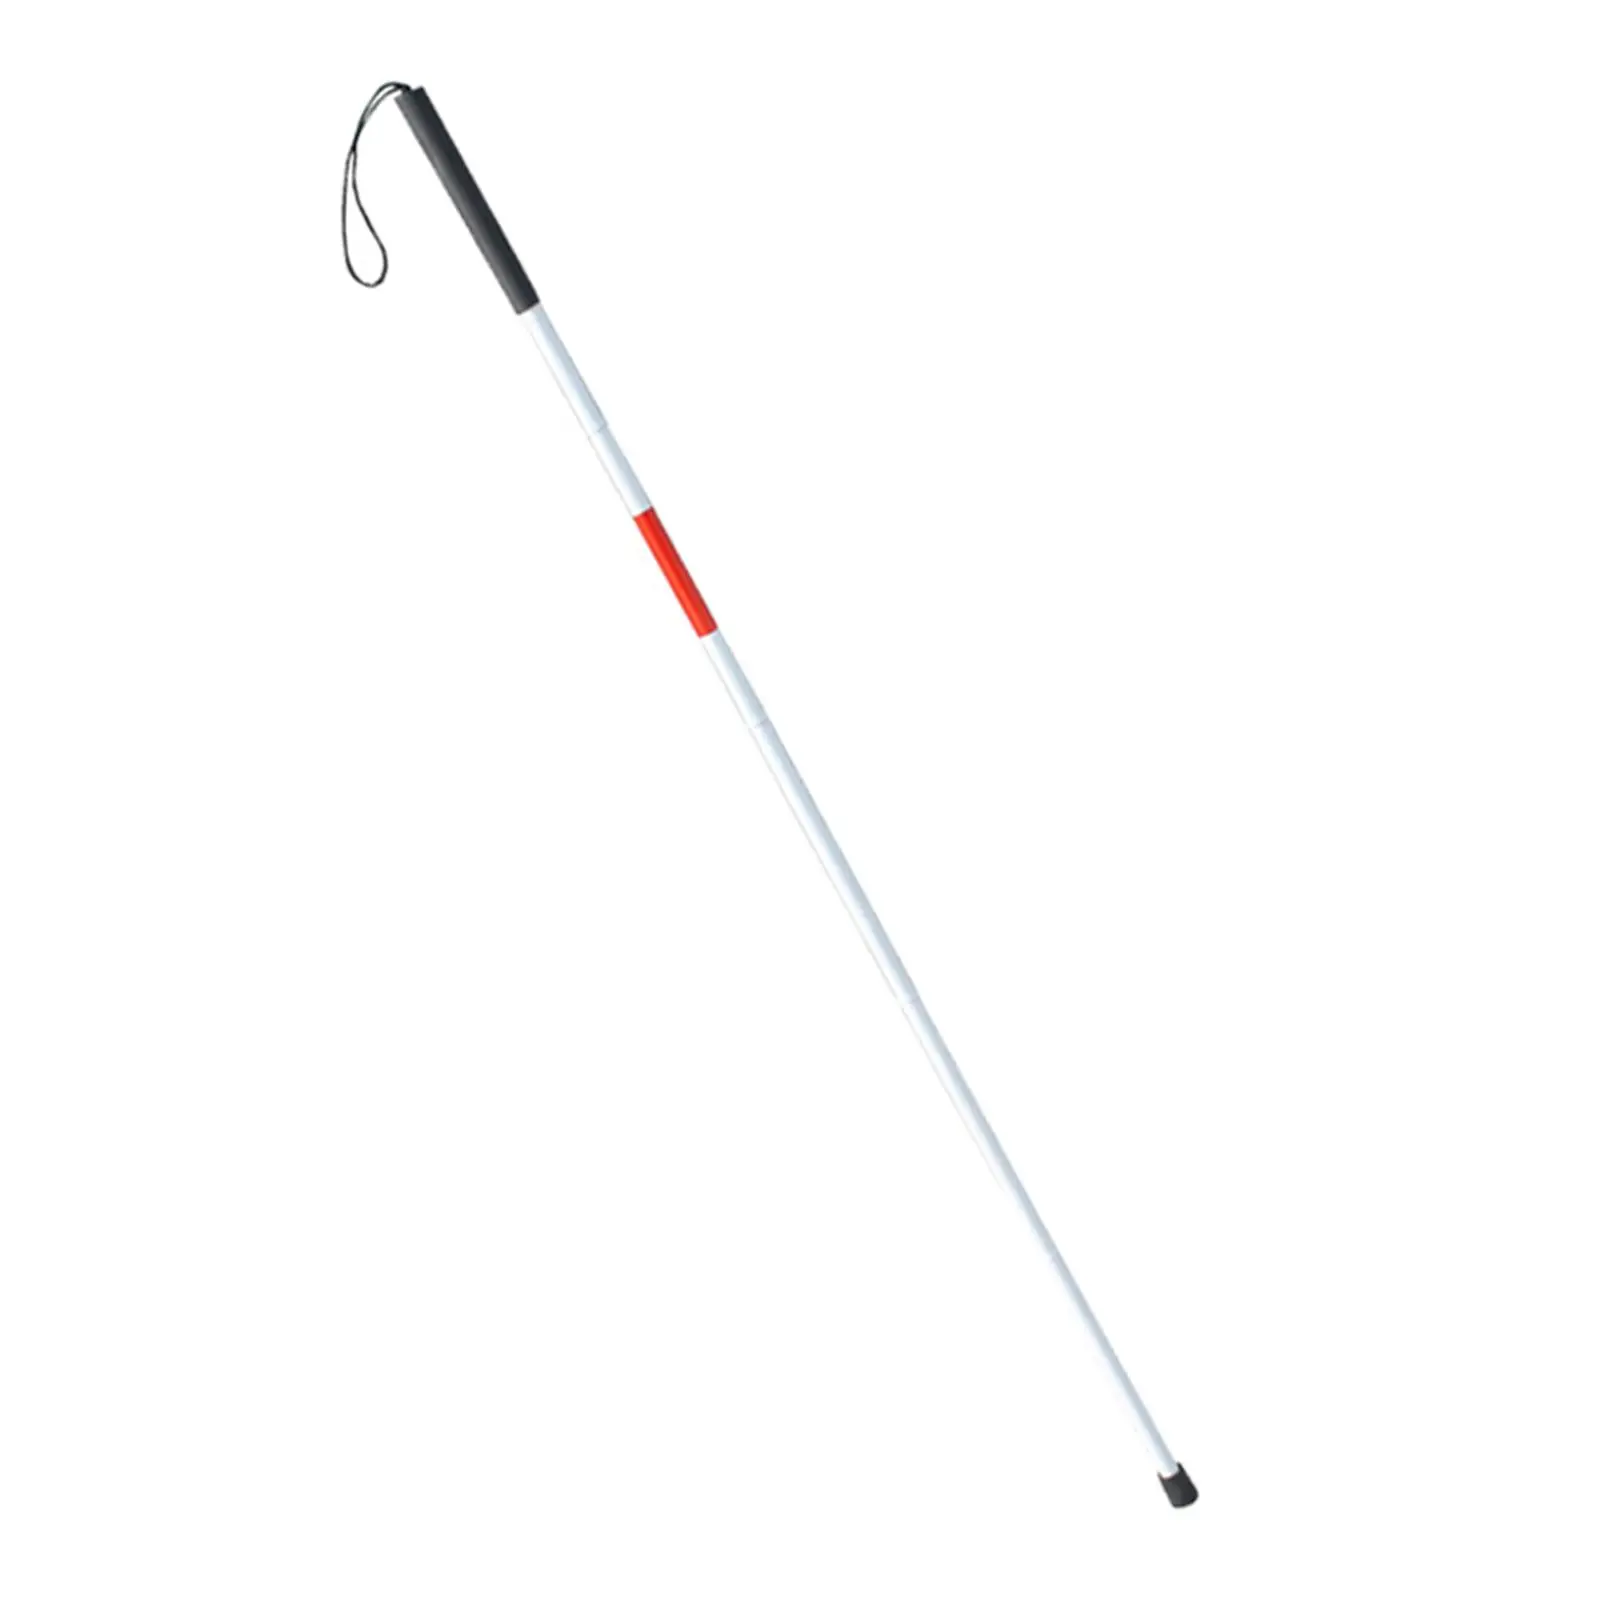 Foldable Cane 124cm in 5 Section  Crutch Hiking Cane Aluminium Alloy Portable  for Blind People  Impaired and Blind